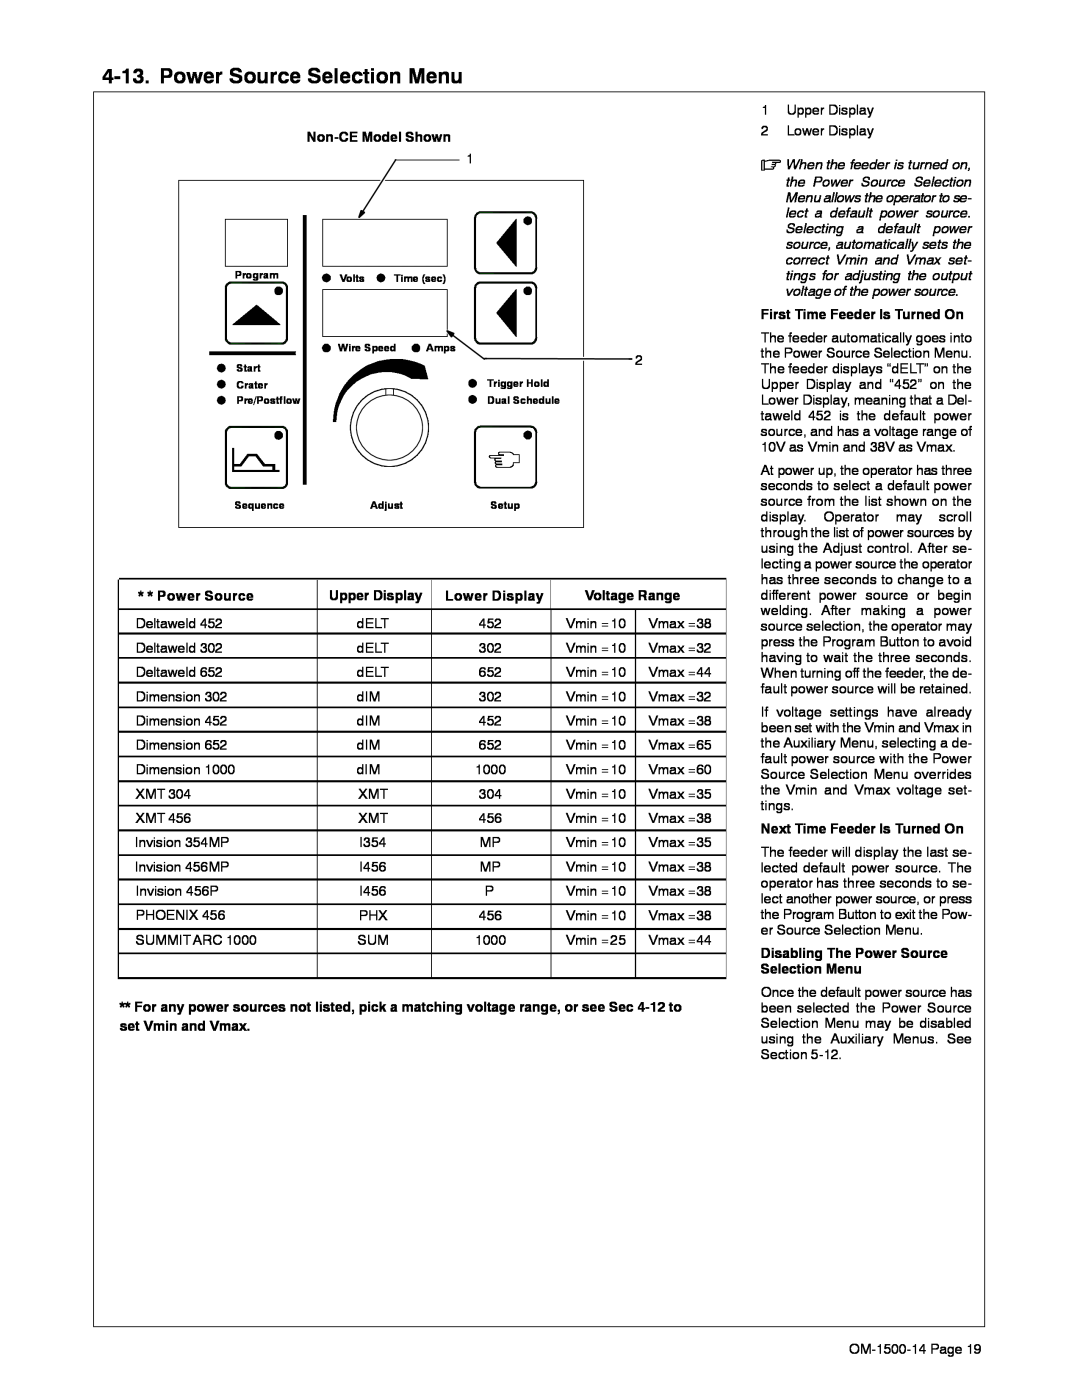 Miller Electric and DS-74DX16 Power Source Selection Menu, Non-CE Model Shown, Upper Display, Lower Display, Voltage Range 